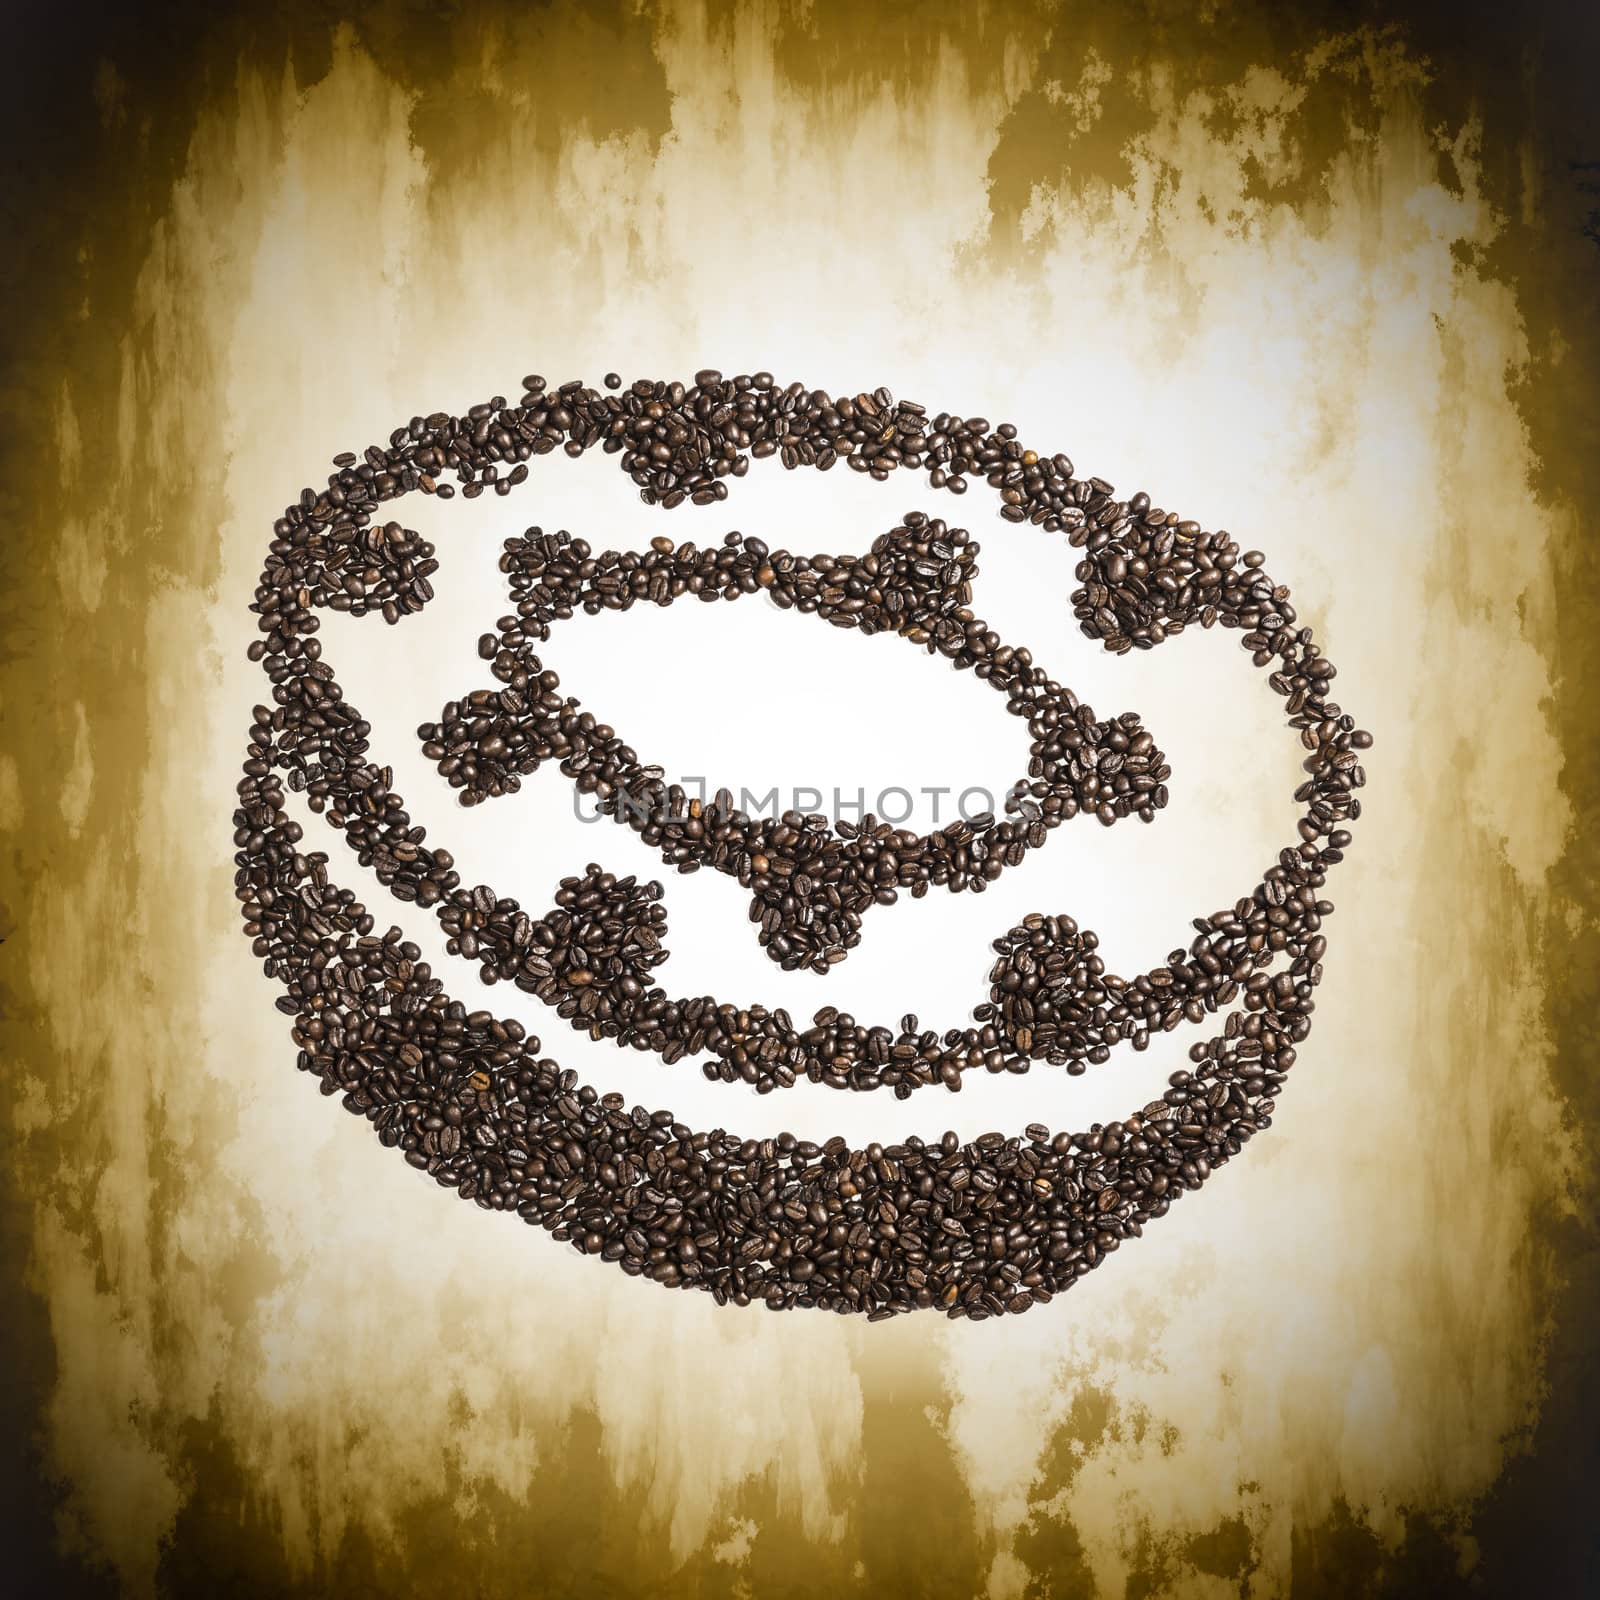 Image of a donut made from coffee beans